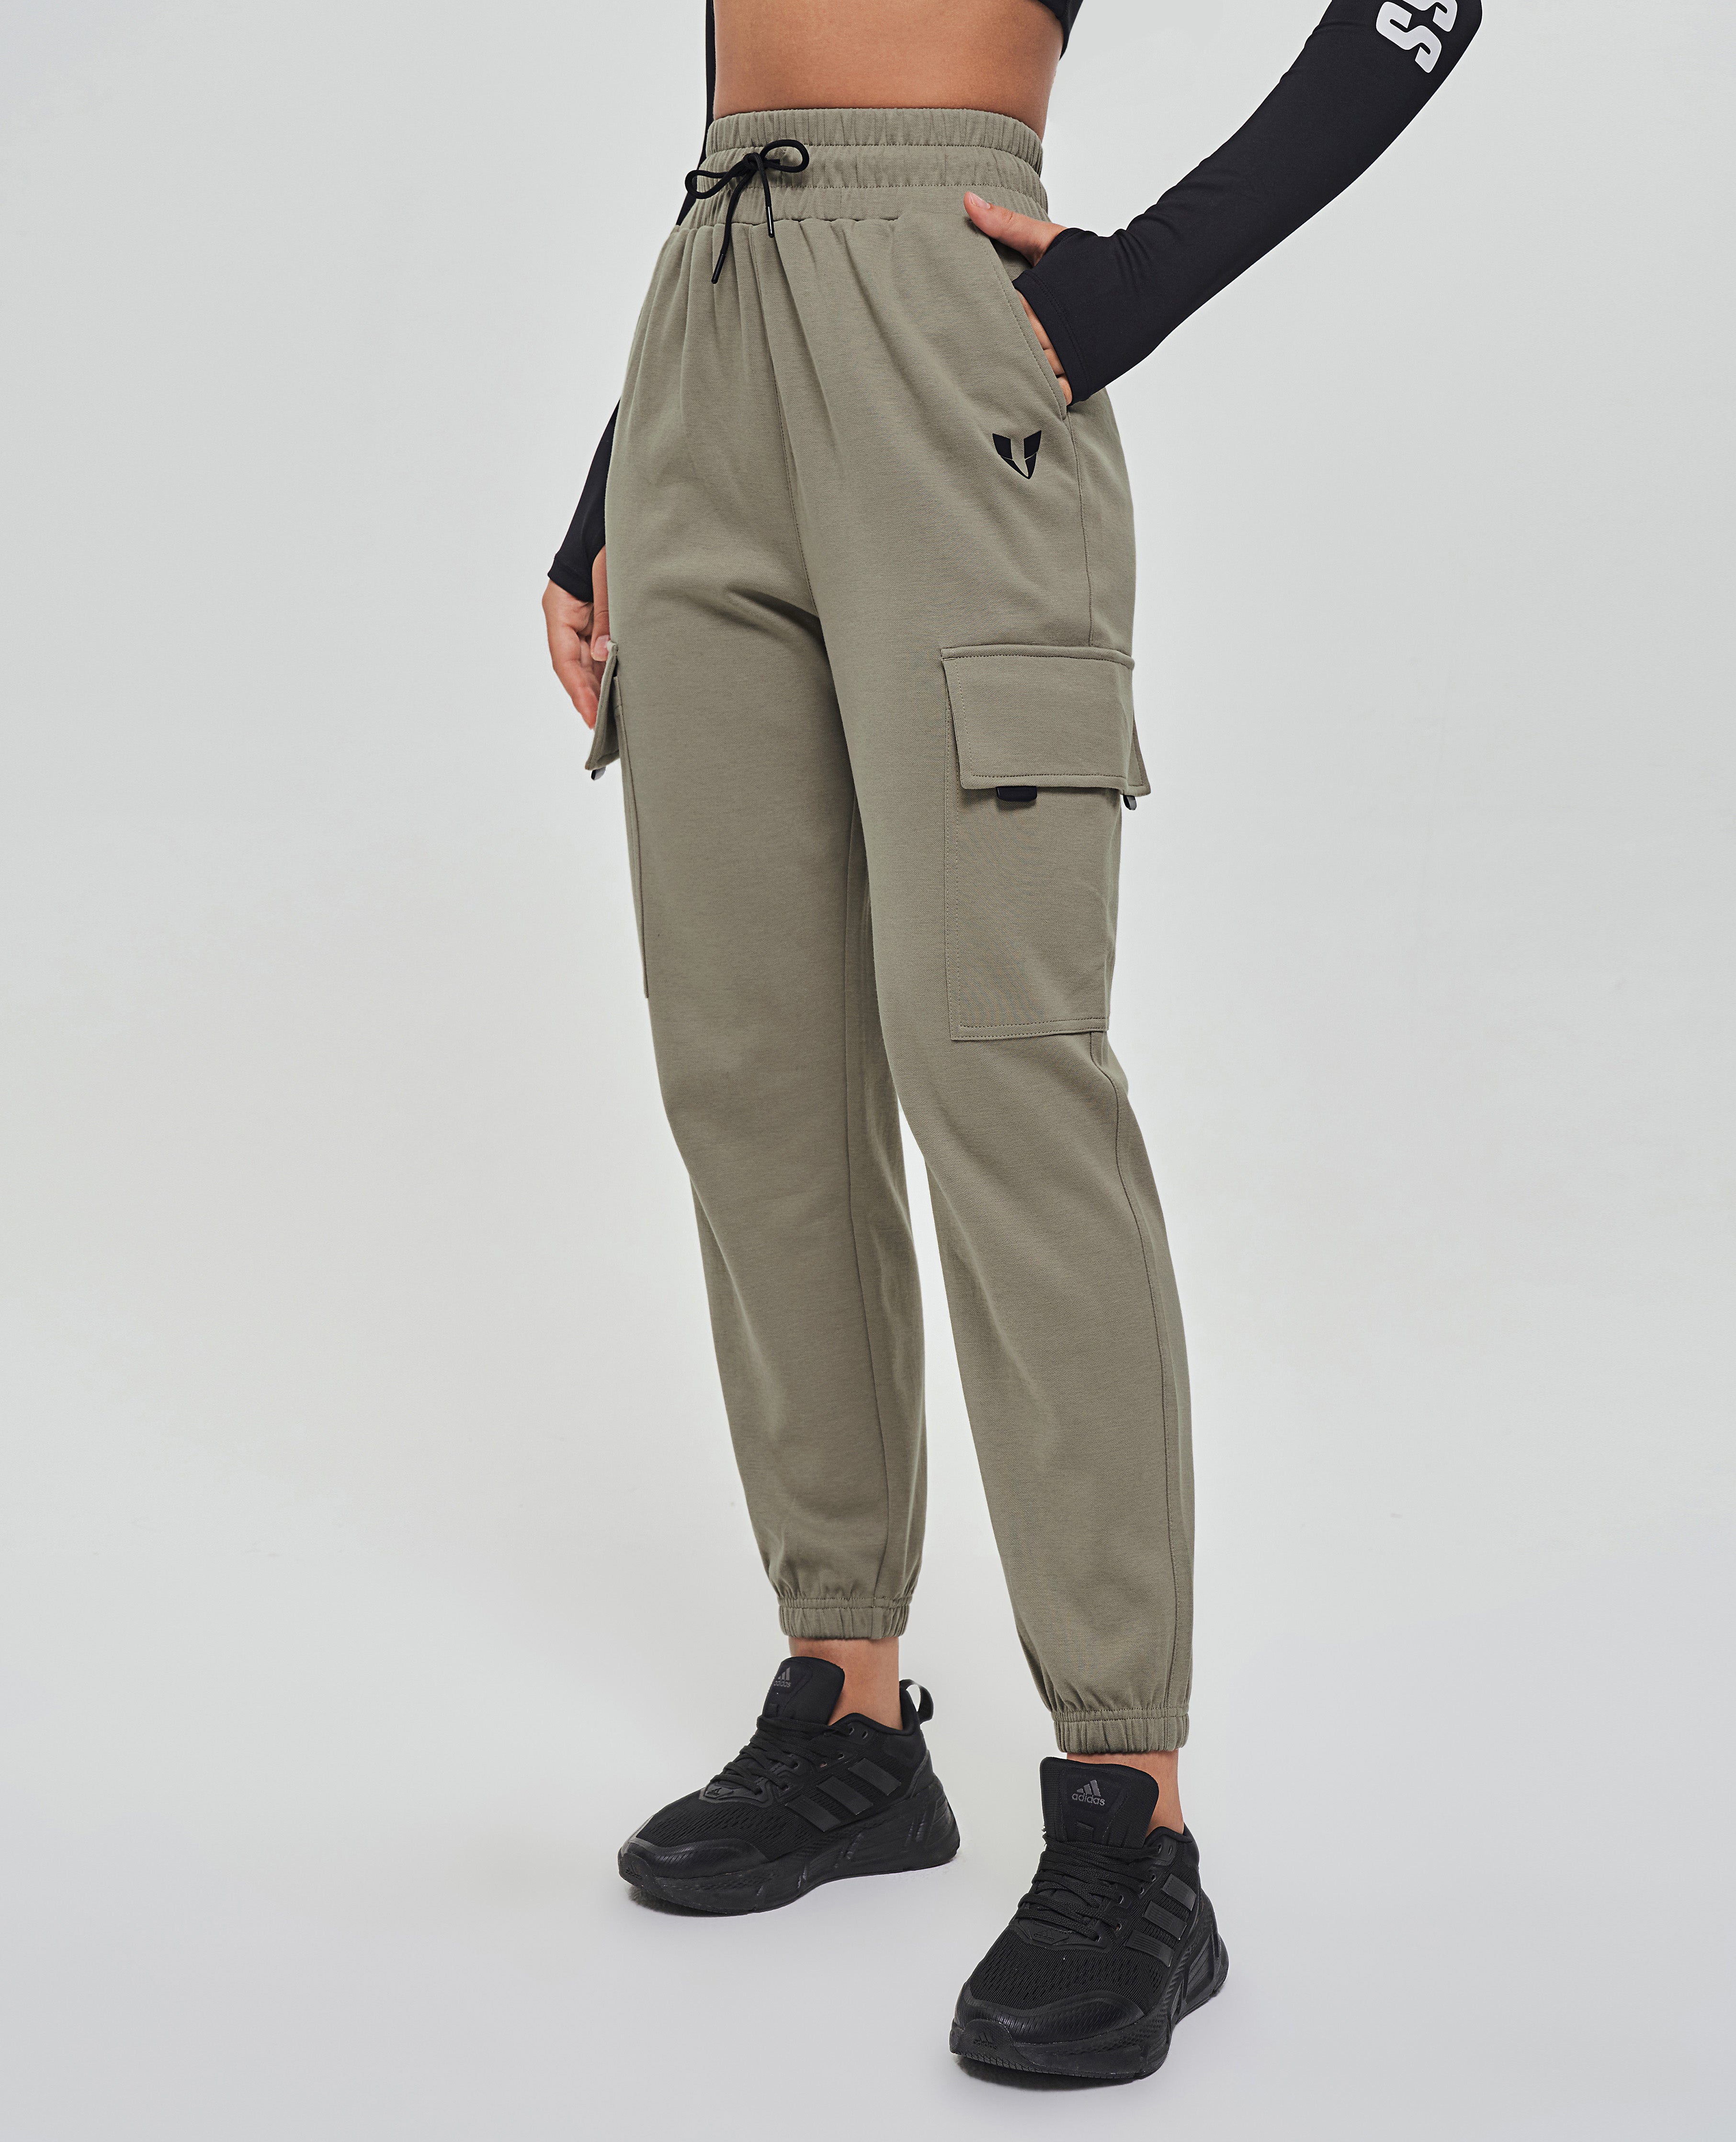 Wide Leg Sweatpants for Women Joggers ABS Cargo FIRM | 